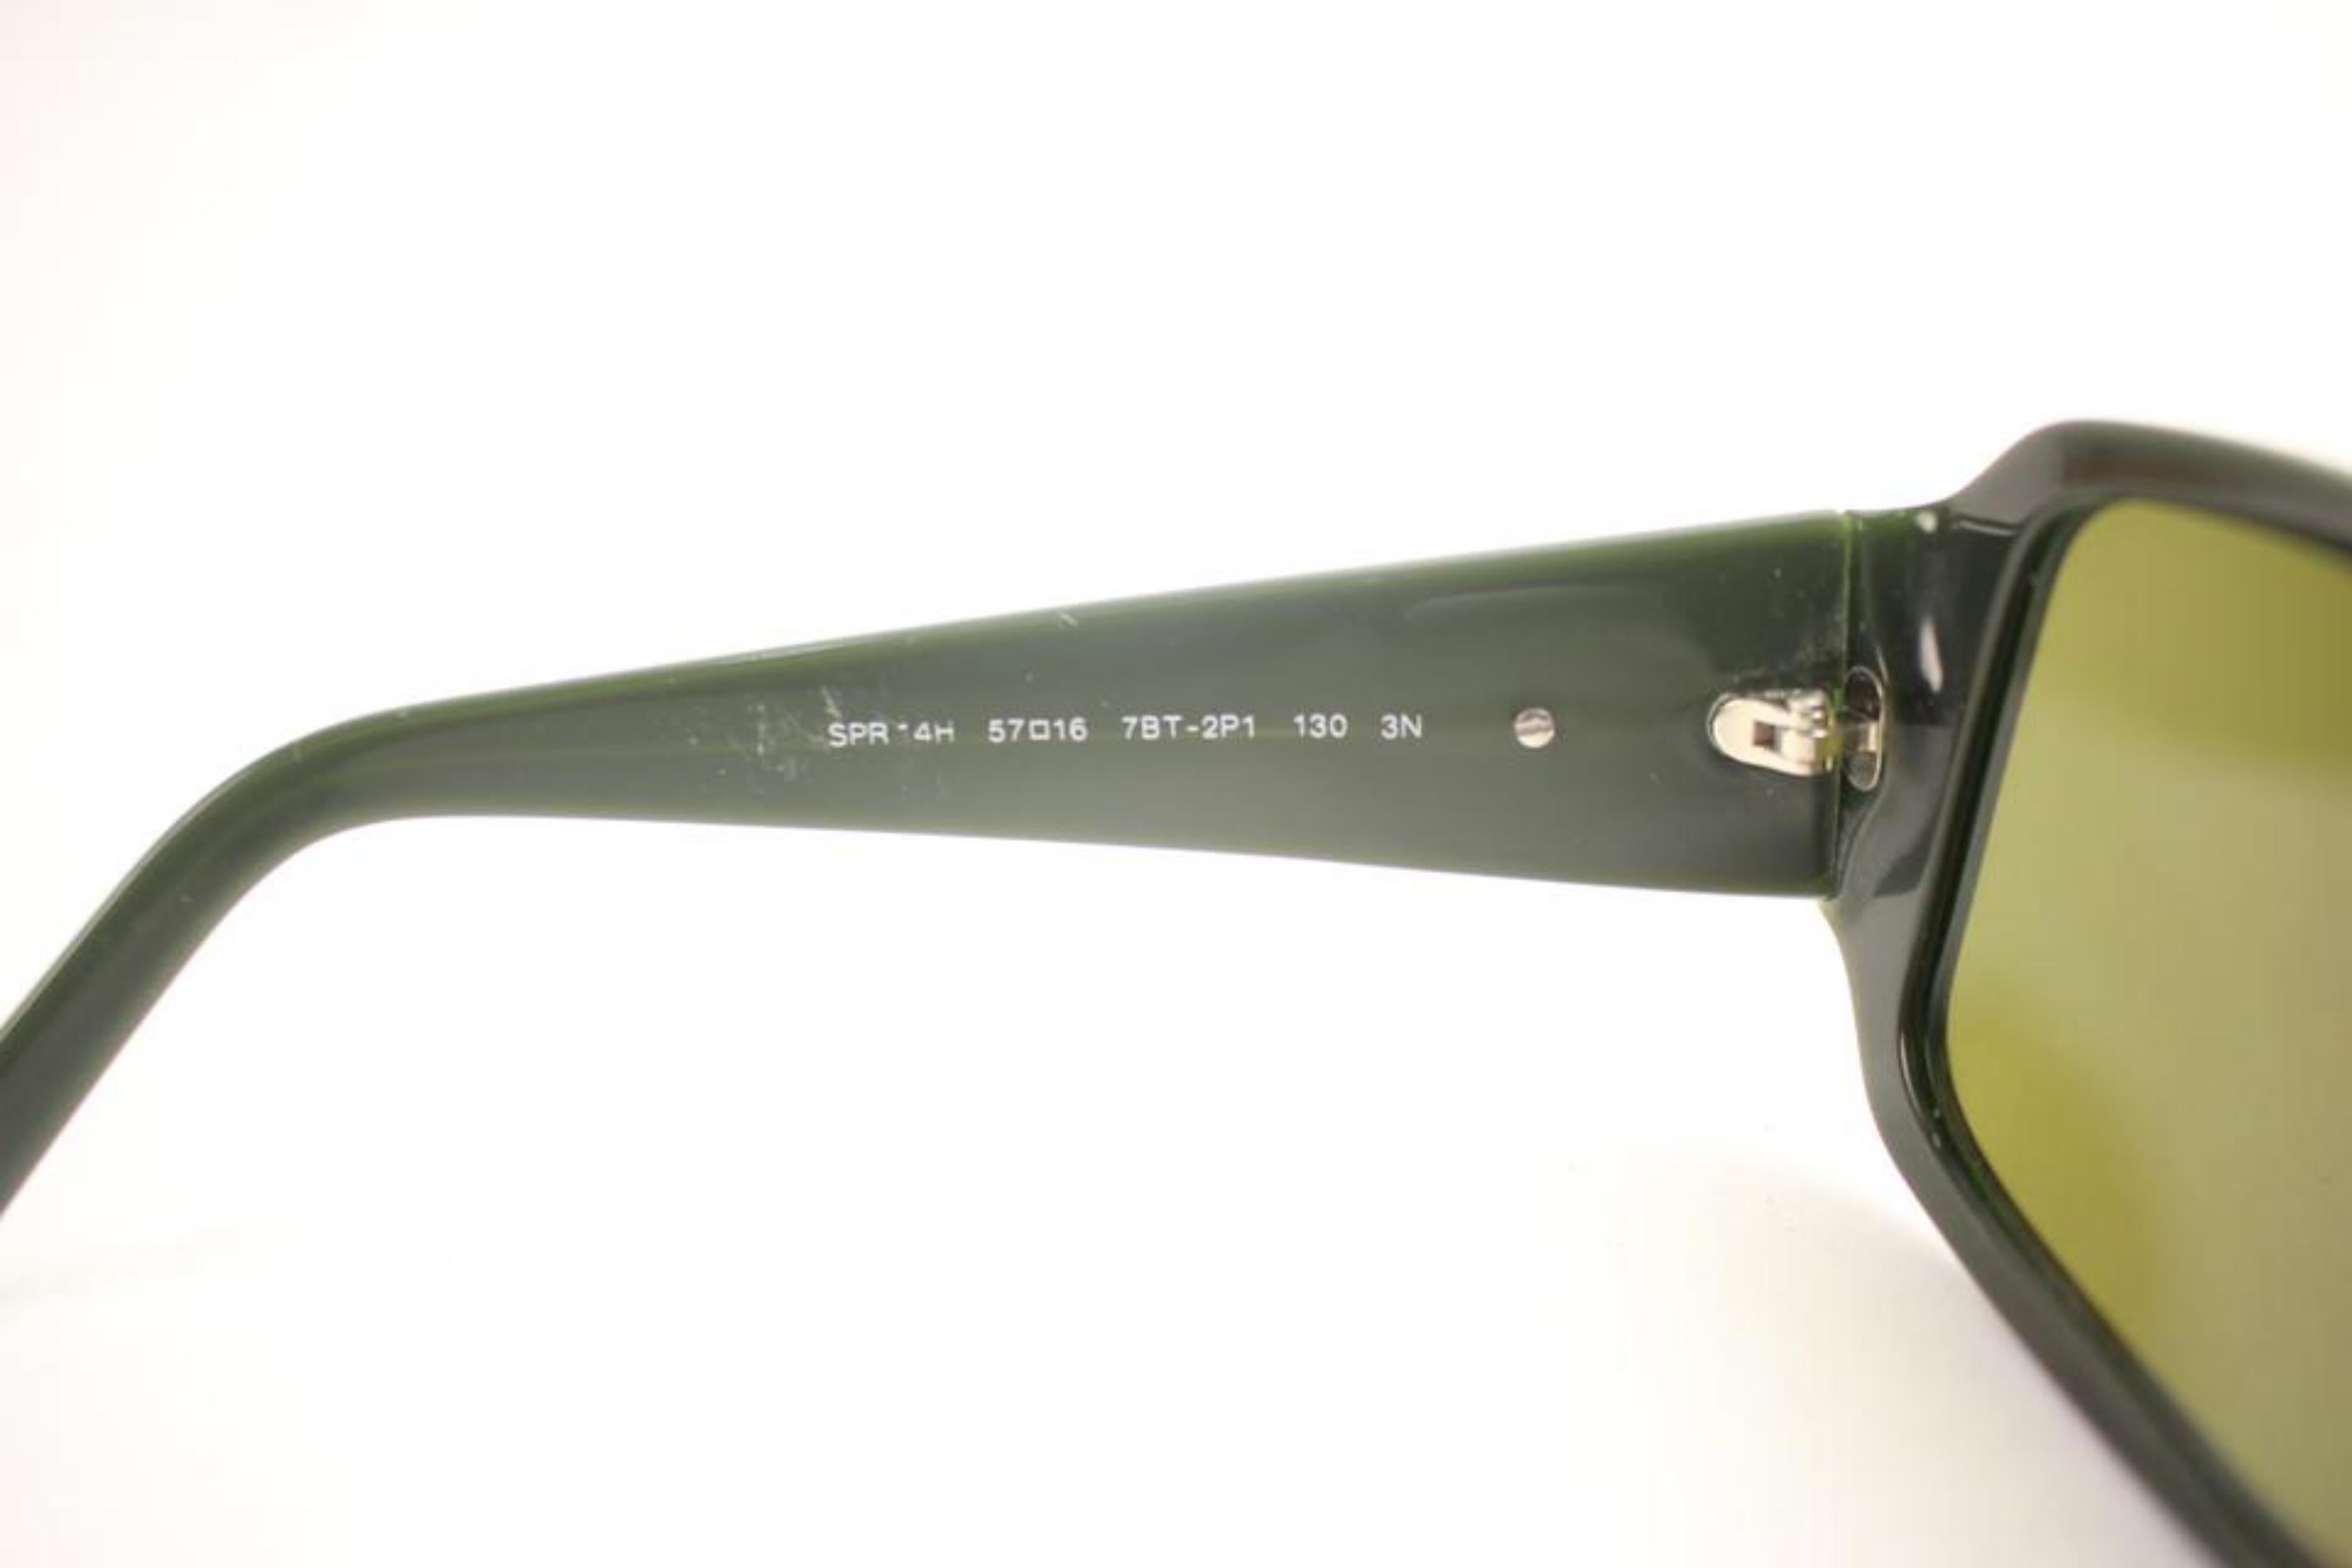 Prada Green Spr14h 7bt-2p1 58pac920 Sunglasses In Good Condition For Sale In Forest Hills, NY